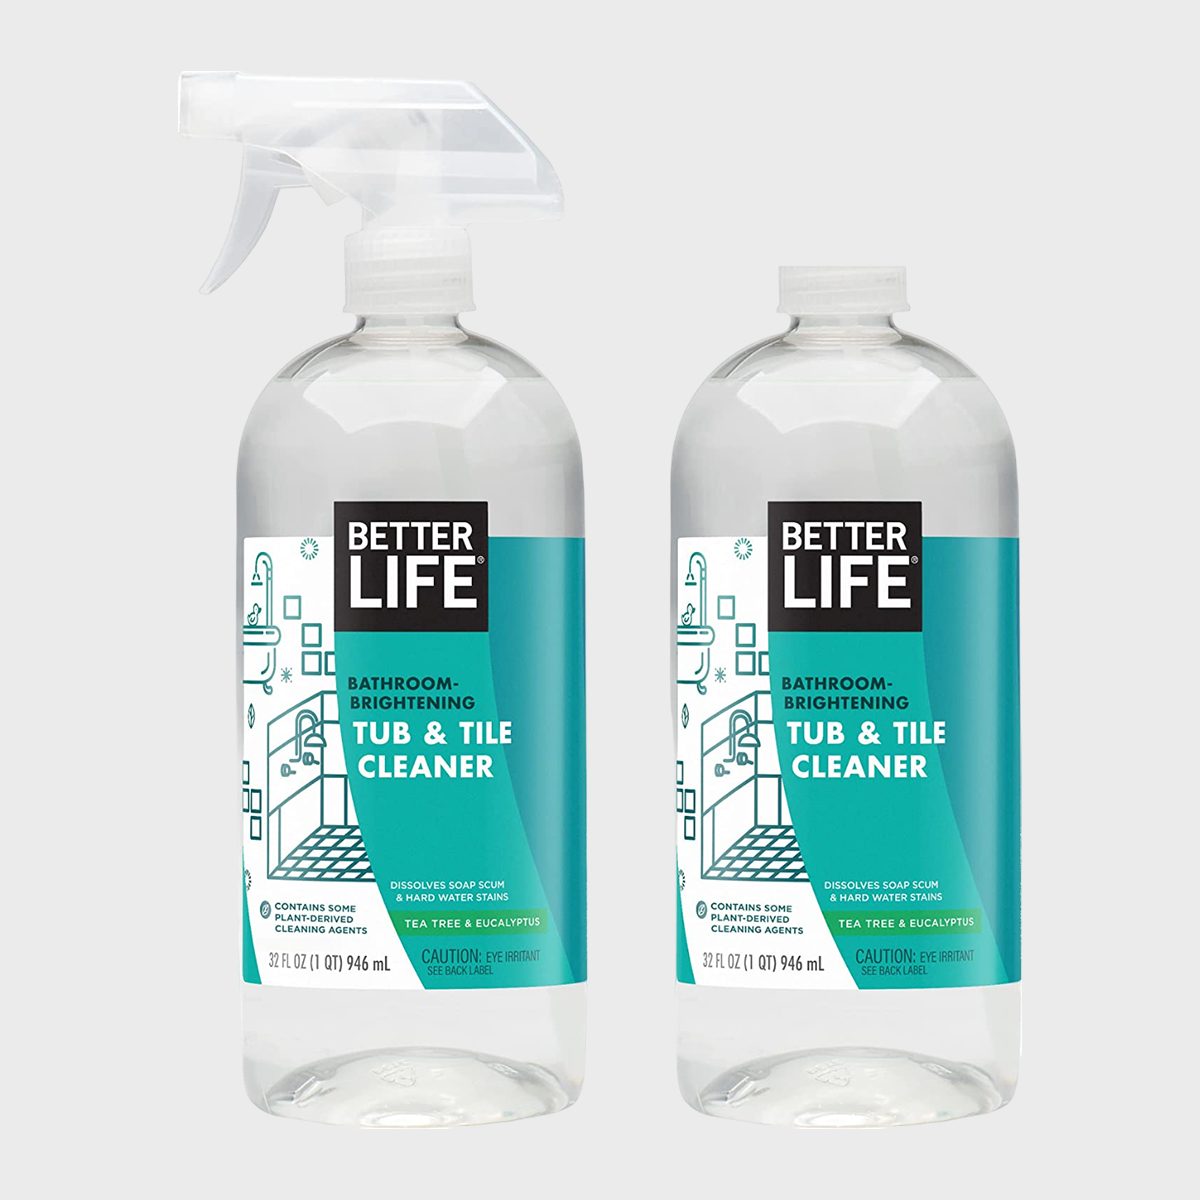 https://www.rd.com/wp-content/uploads/2023/04/Better-Life-Tub-and-Tile-Cleaner_ecomm_via-amazon.com_.jpg?fit=700%2C700